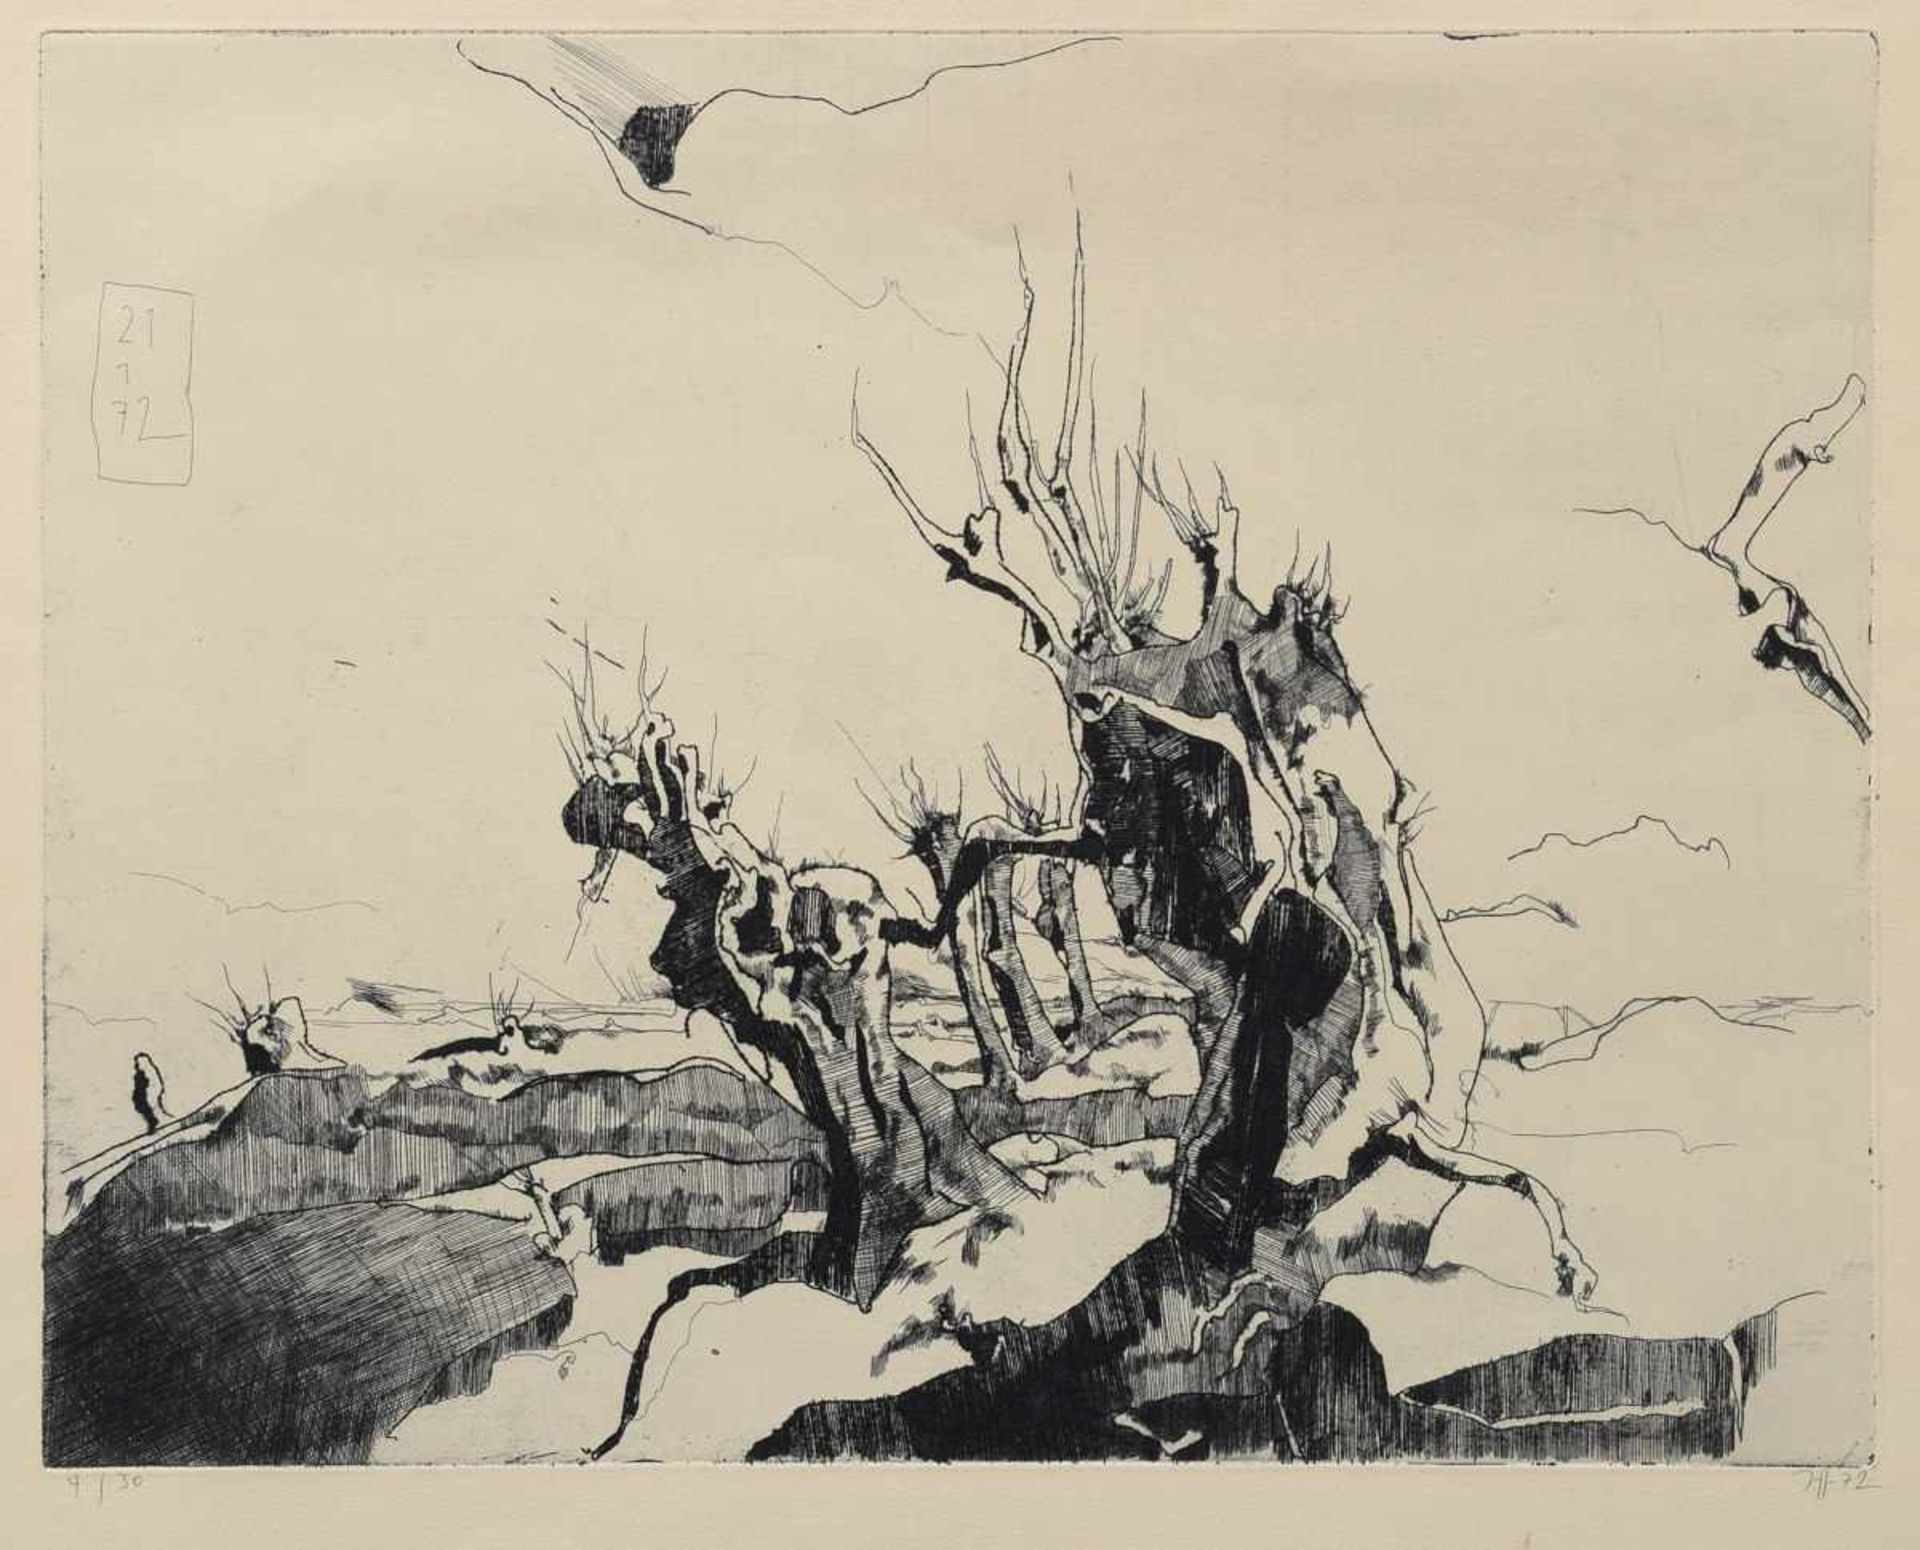 Janssen, Horst (1929-1995) "Landscape" from "7 etchings" 21.1.72, drypoint 4/30, signed and dated